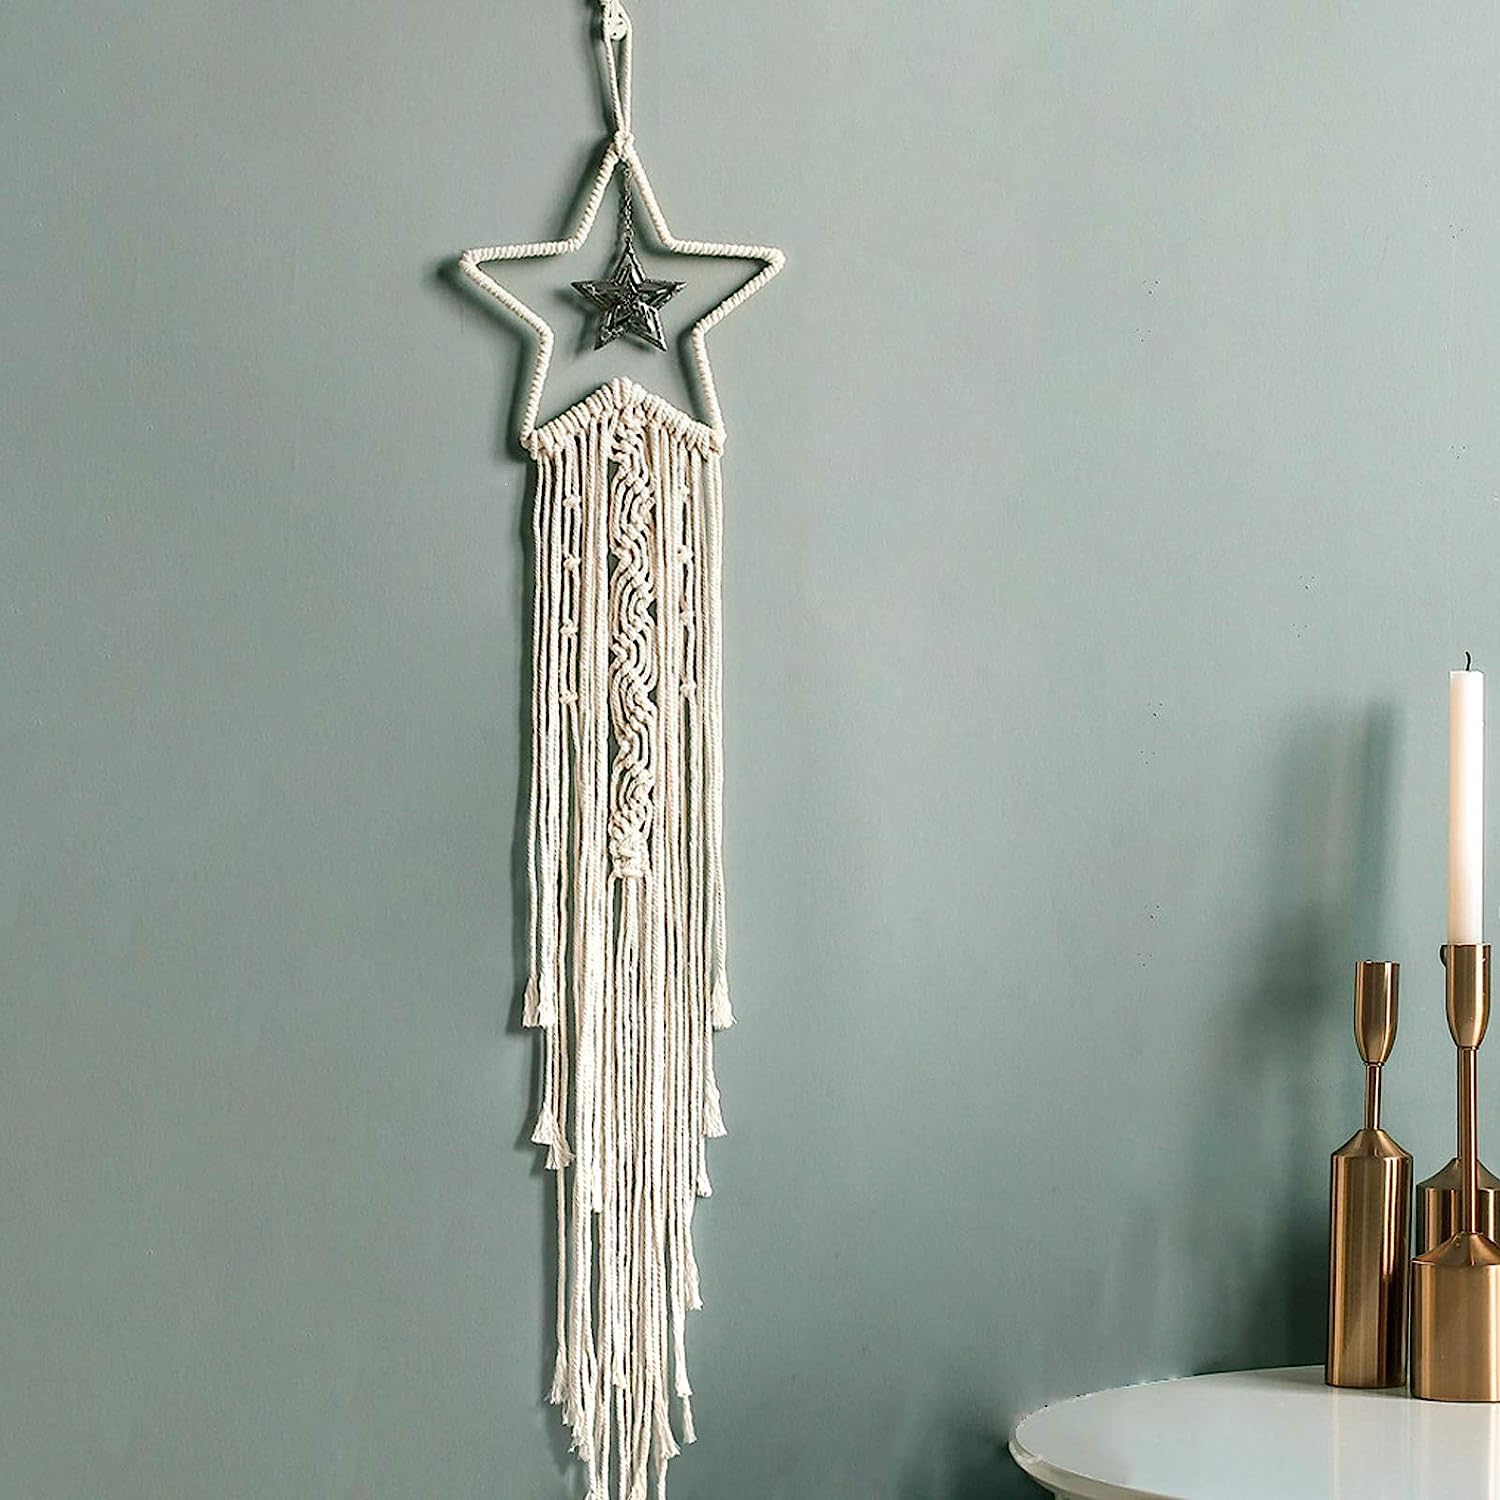 star macrame wall hanging with cool interior